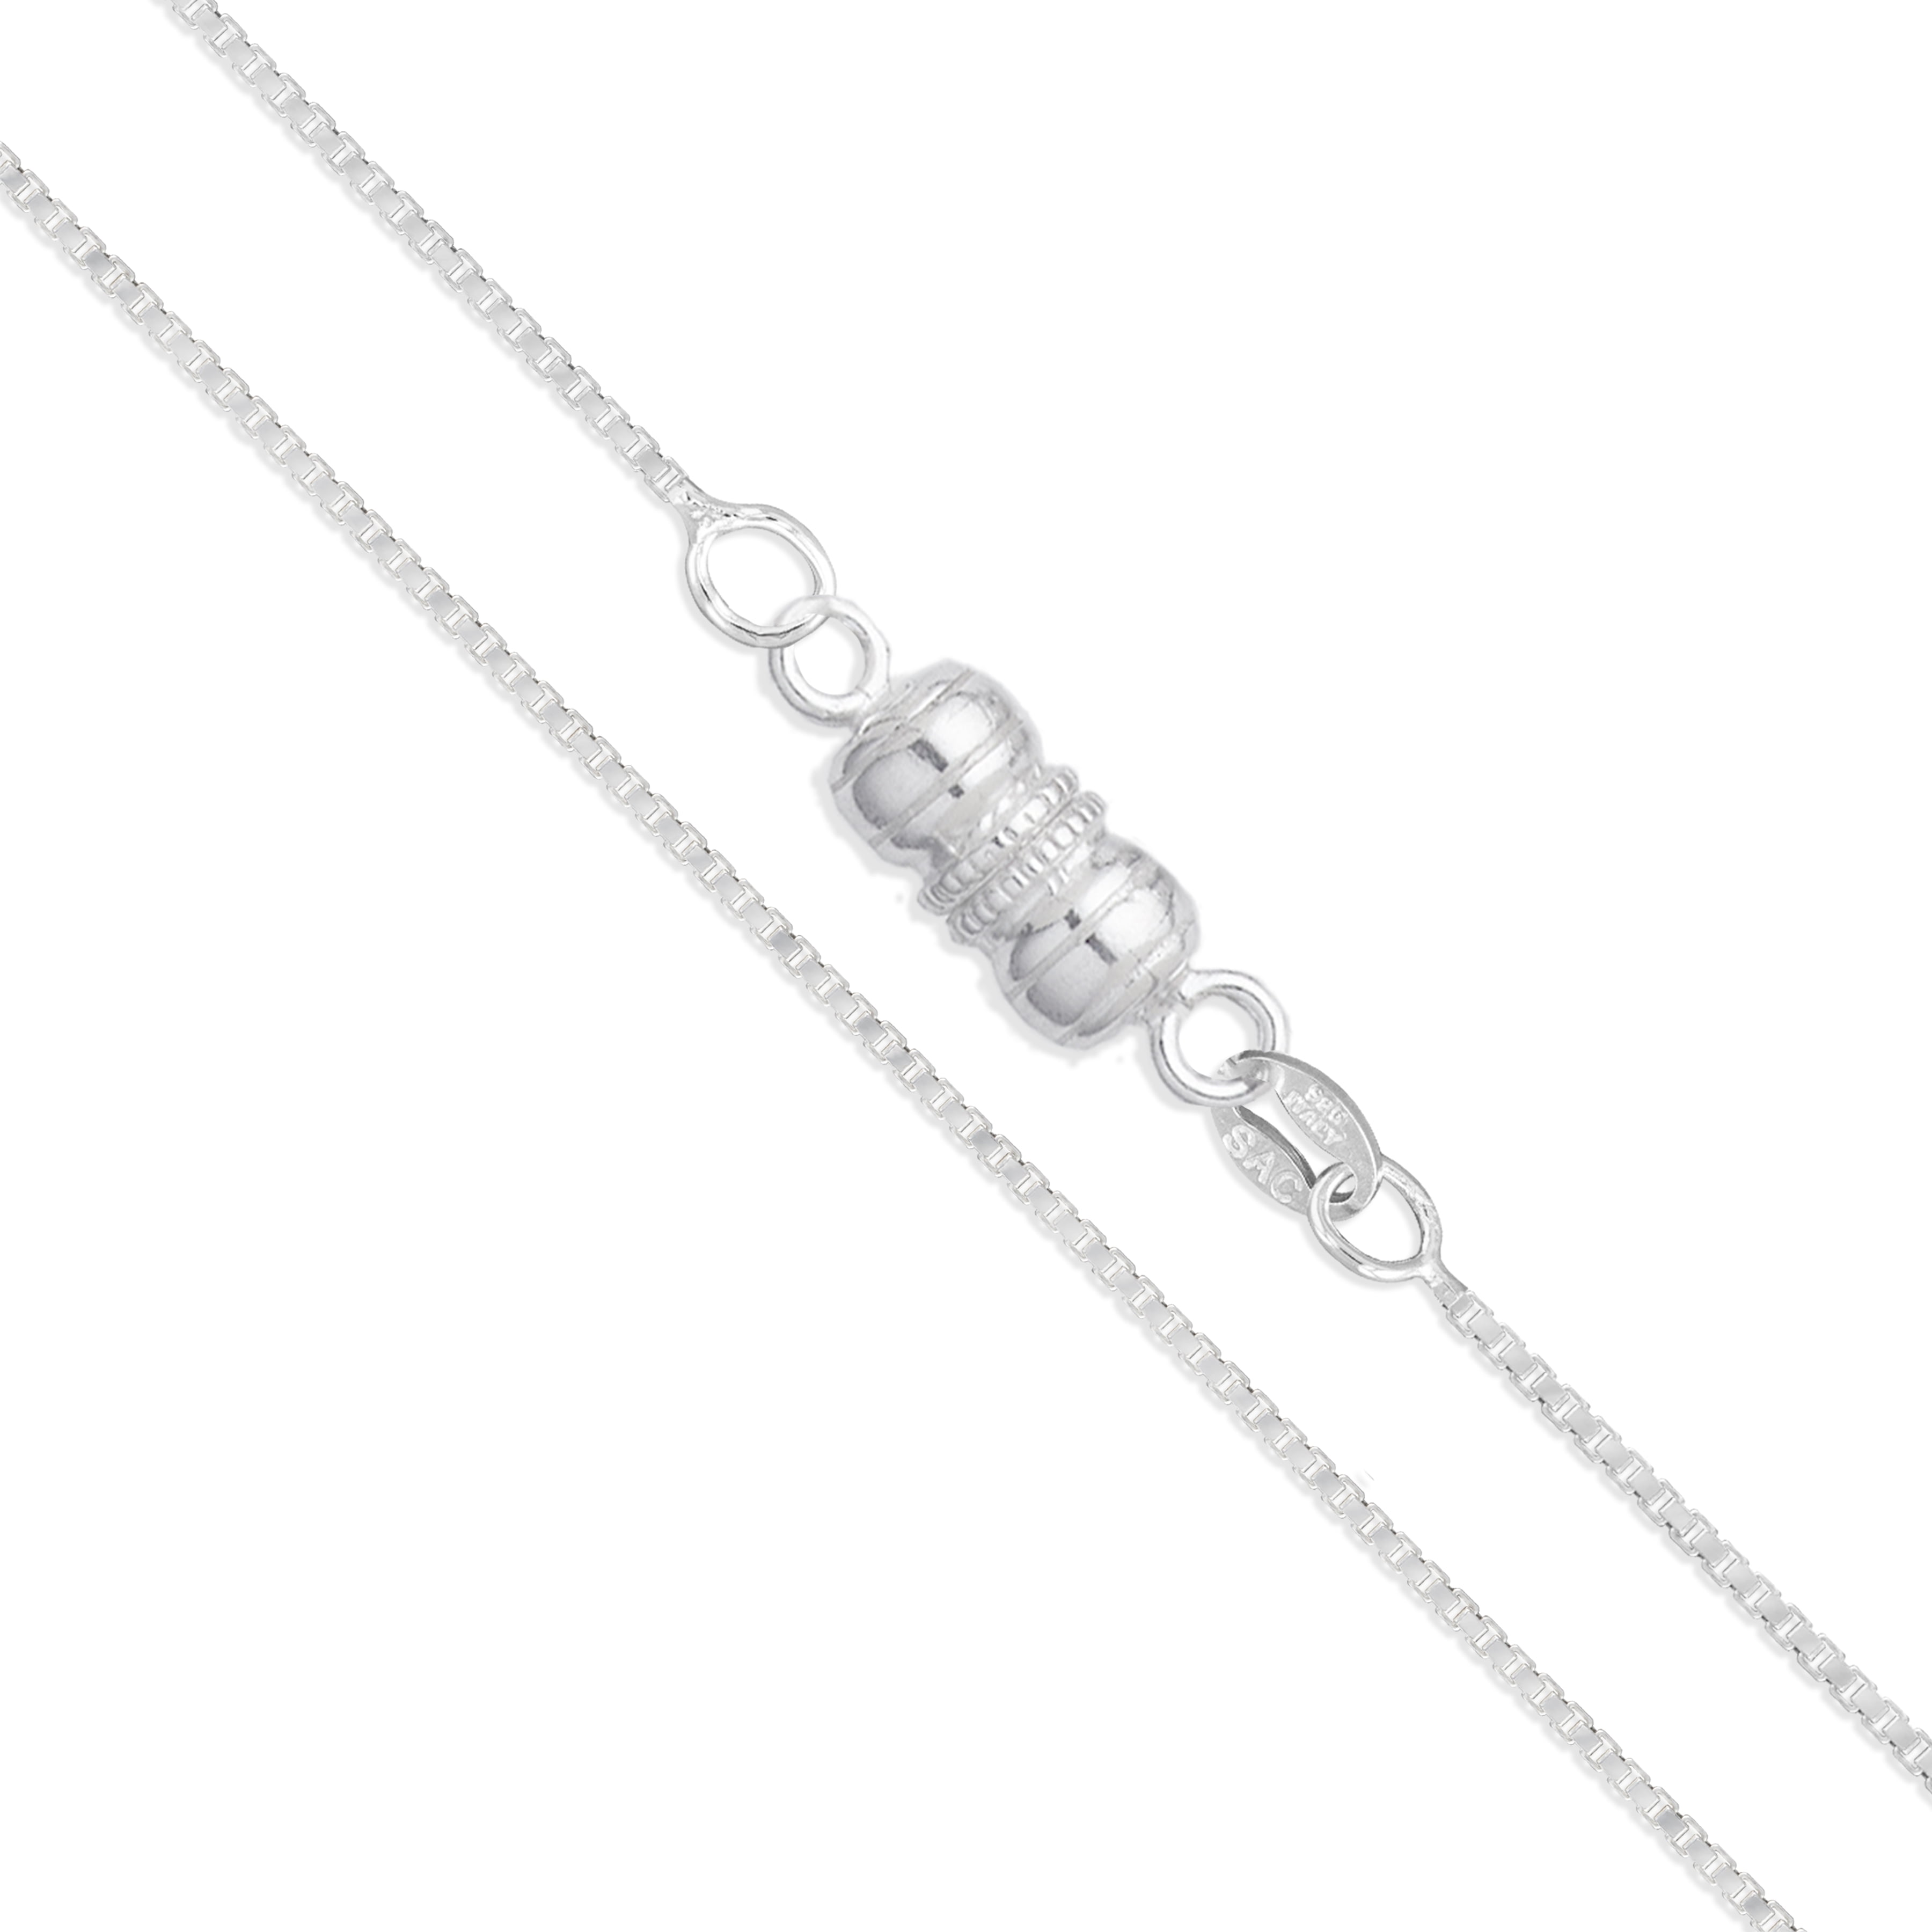  Sterling Silver Necklace Extenders Silver Extenders